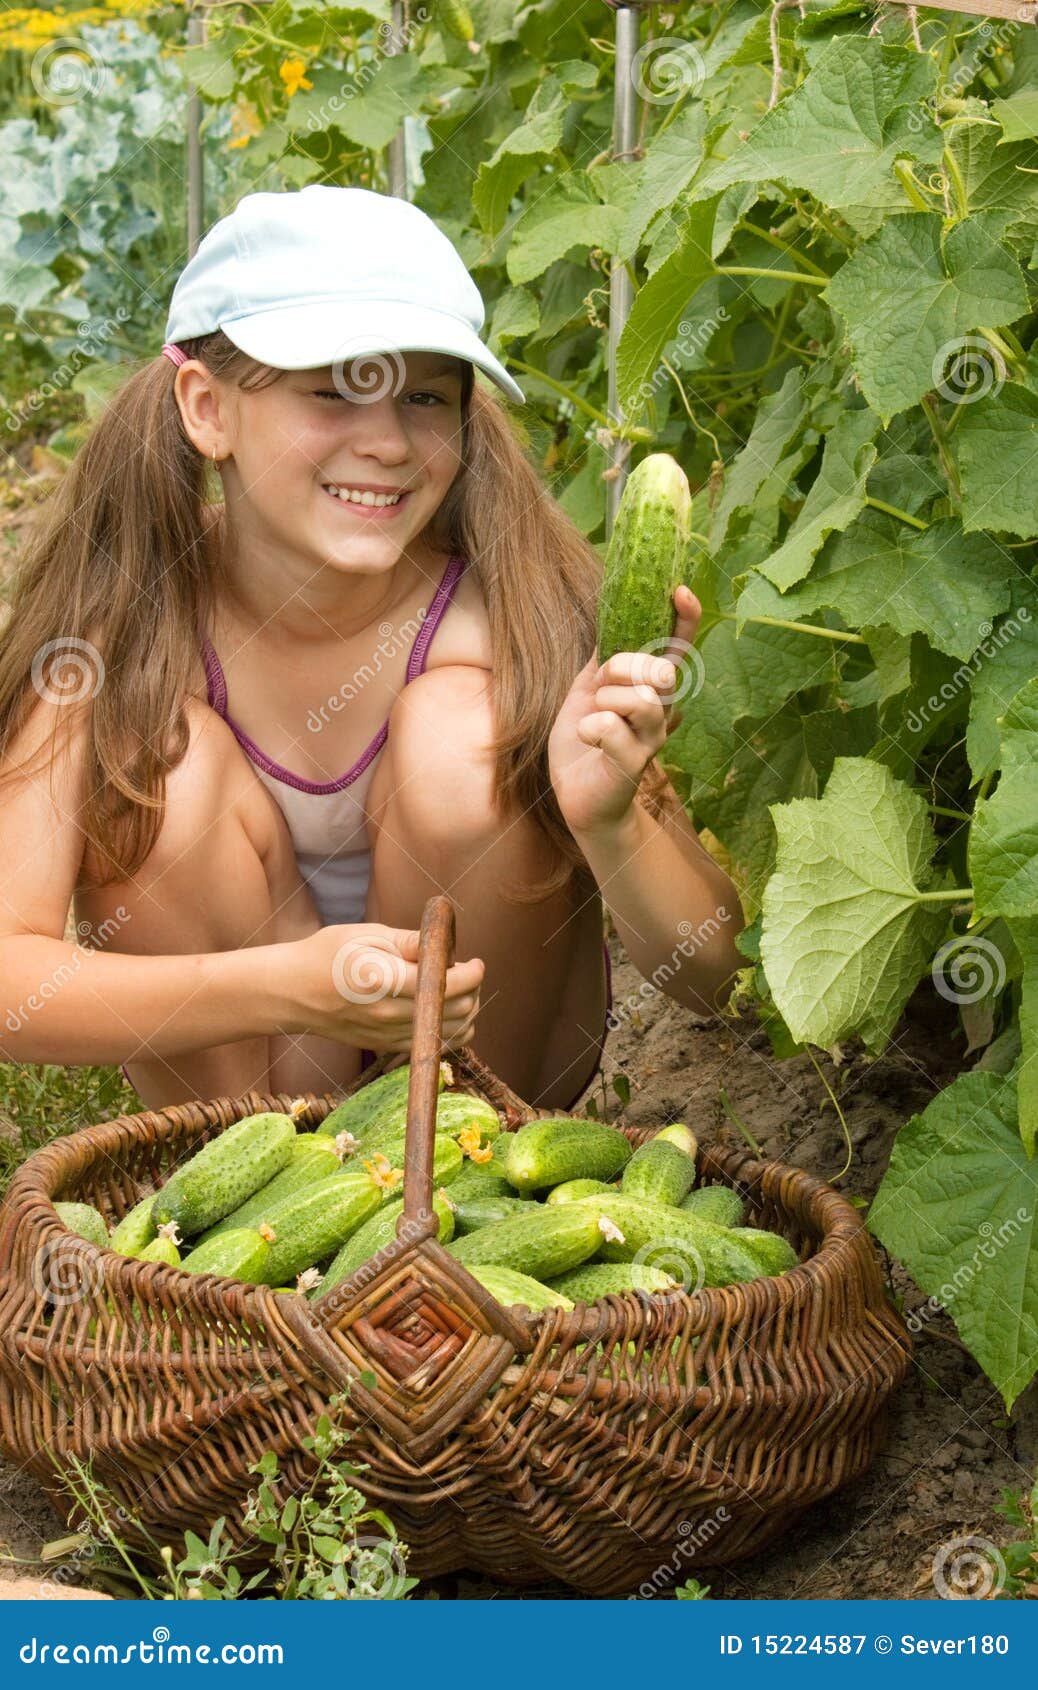 Girls and cucumber